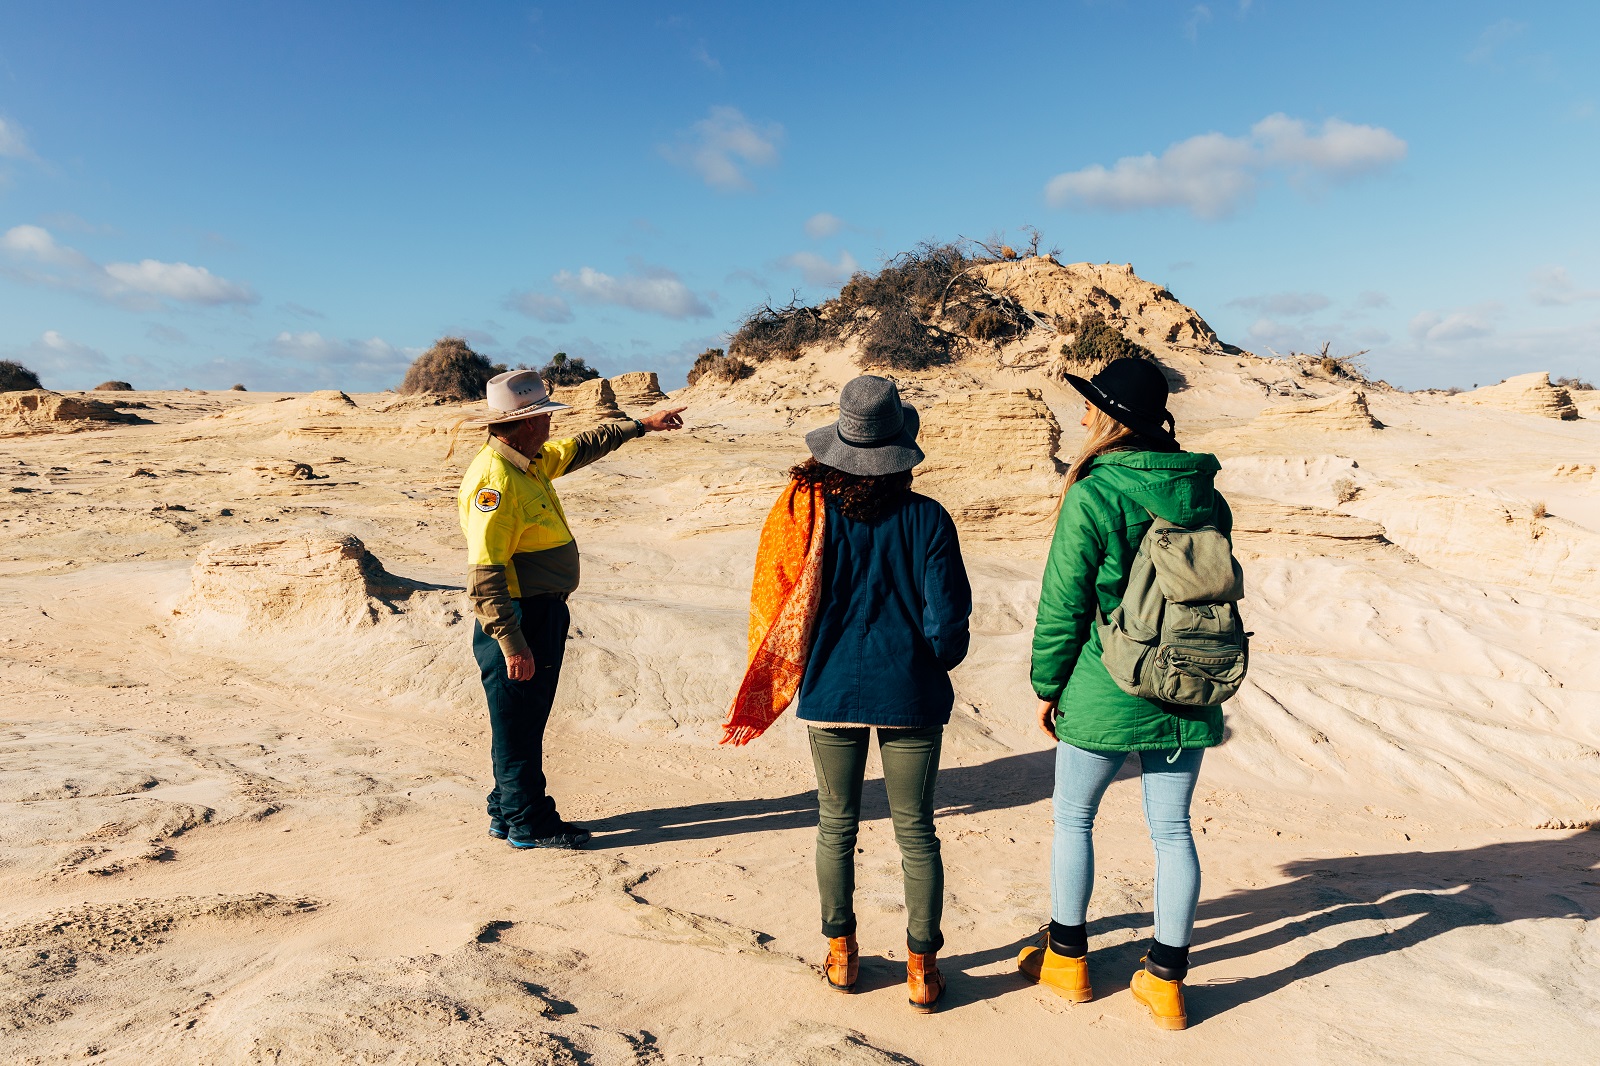 Group visiting Walls of China on a NPWS guided tour in Mungo National Park. Photo credit: Melissa Findley/DPIE